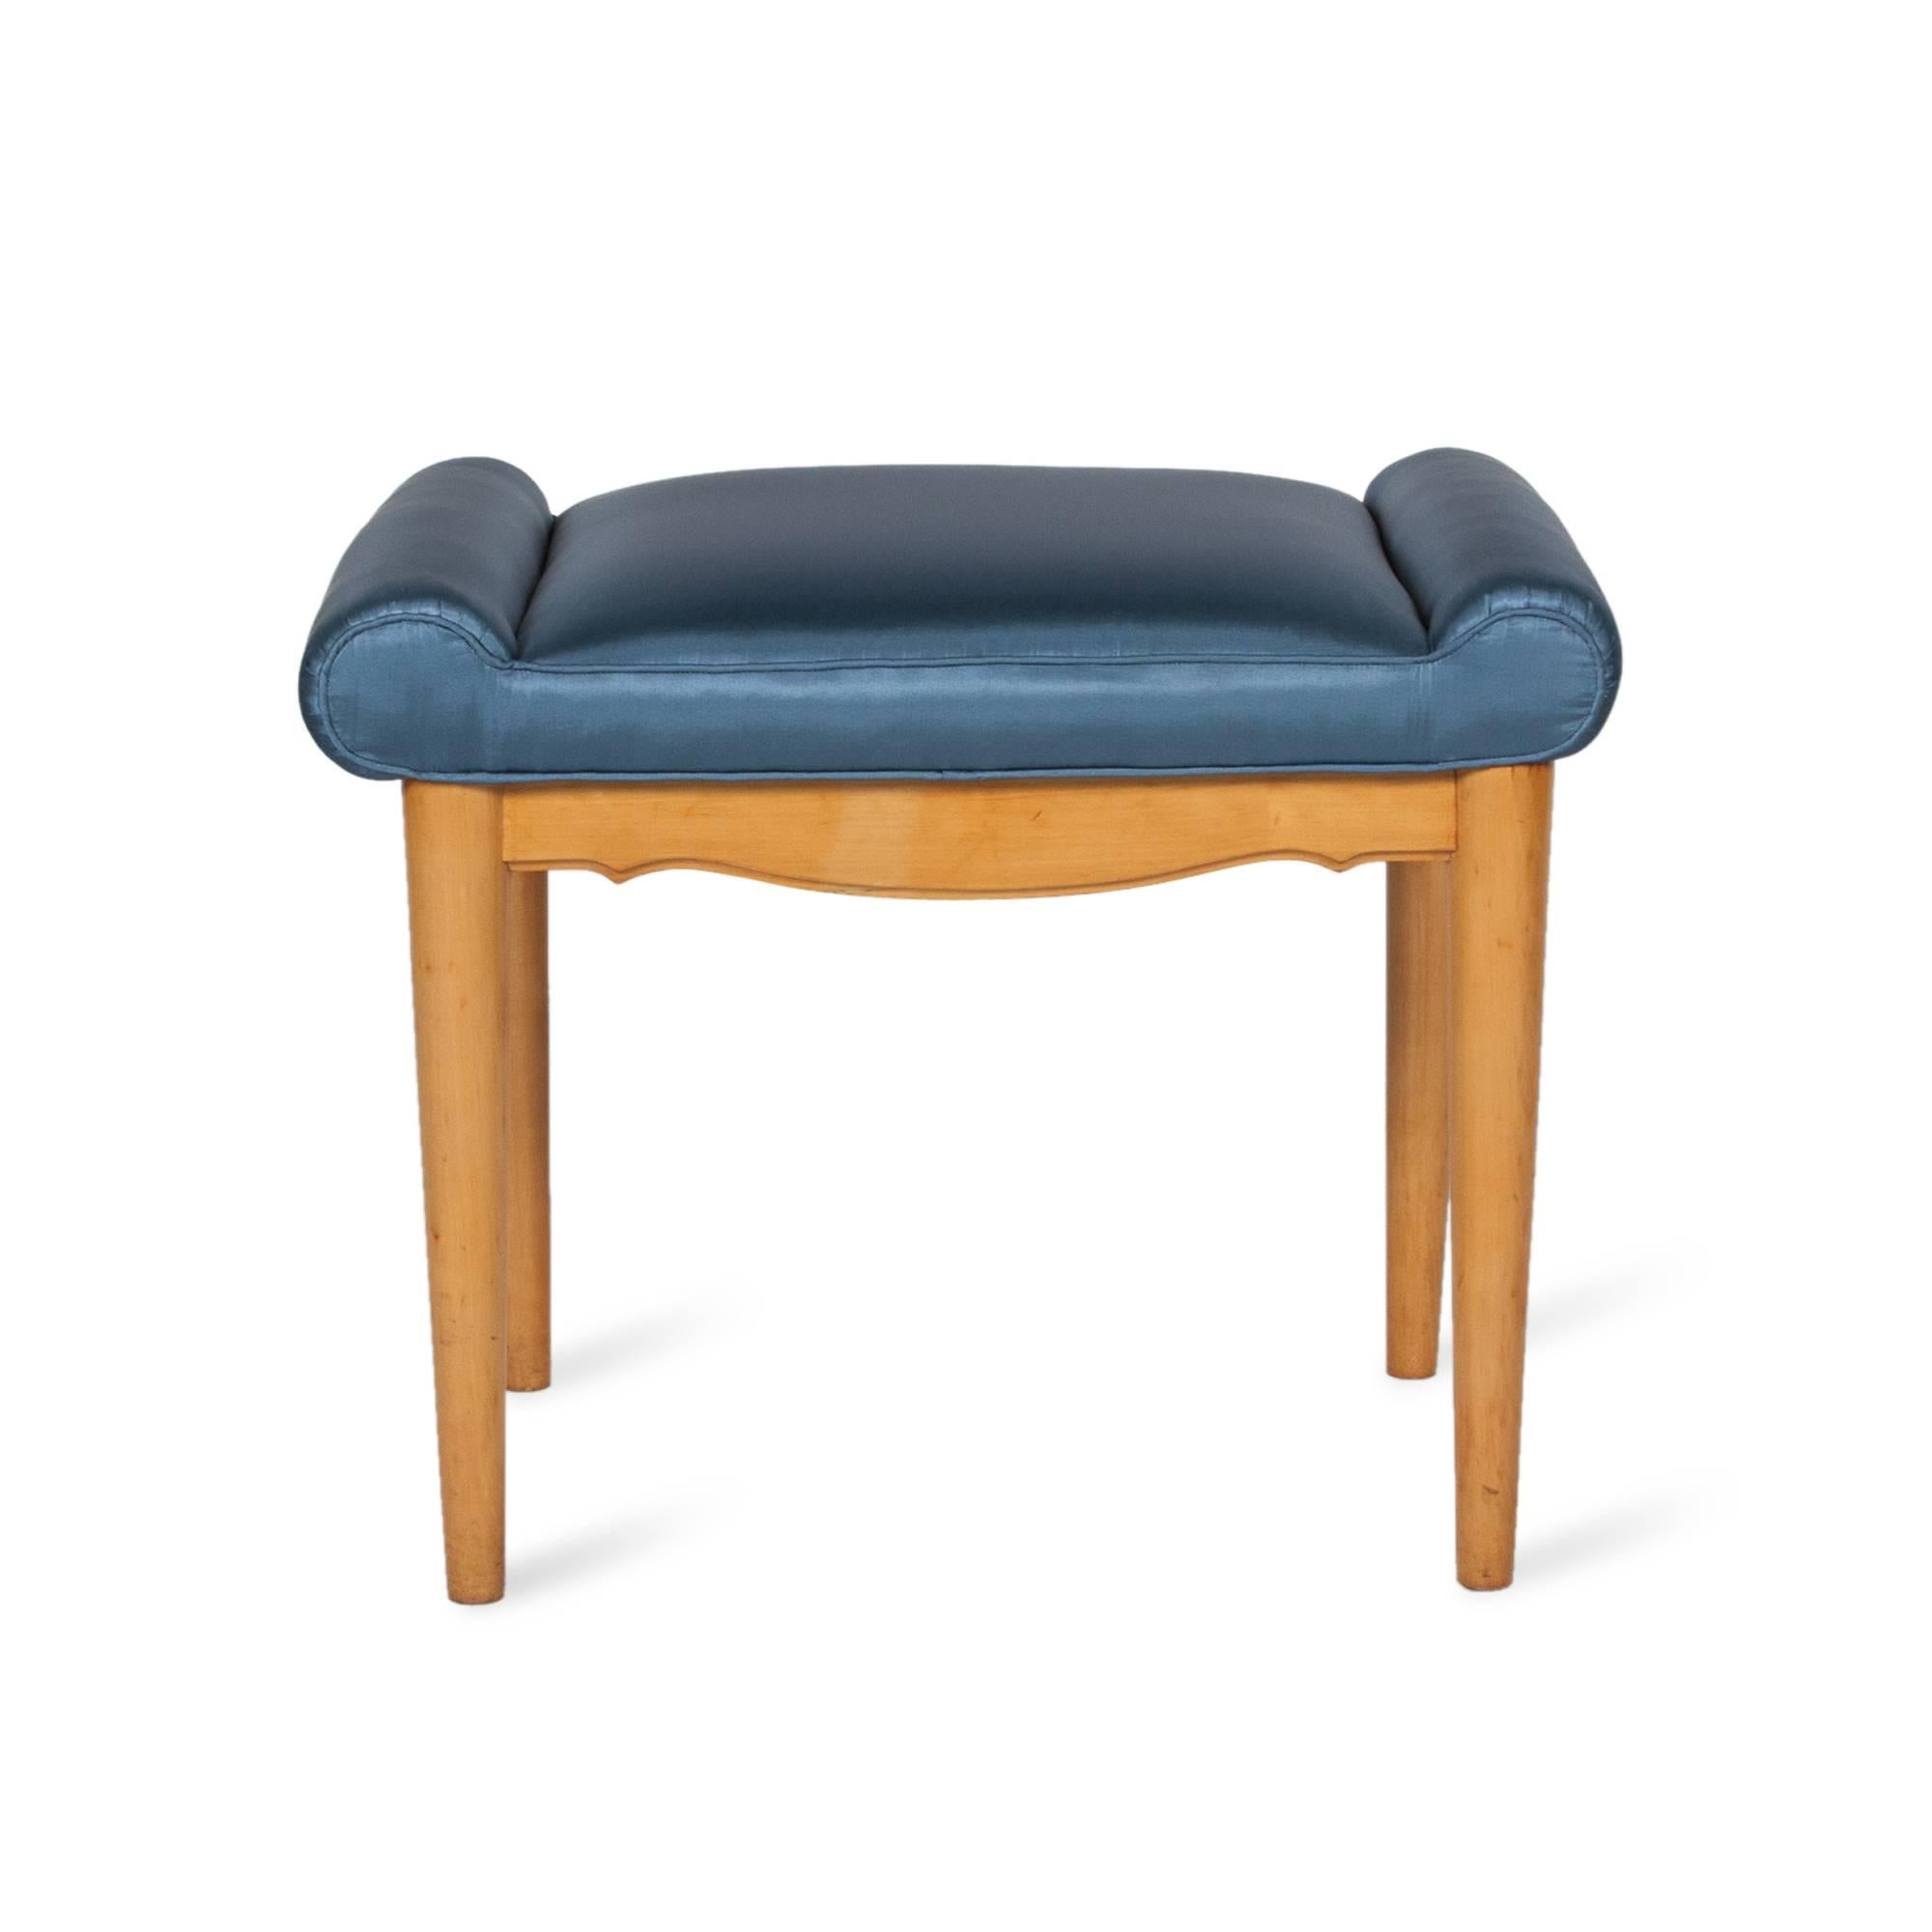 Sycamore vanity bench with scroll seat and apron, light blue satin upholstery, round tapered legs, American, 1930s. Measures: Width 23 in, depth 16 in, height 18 in.